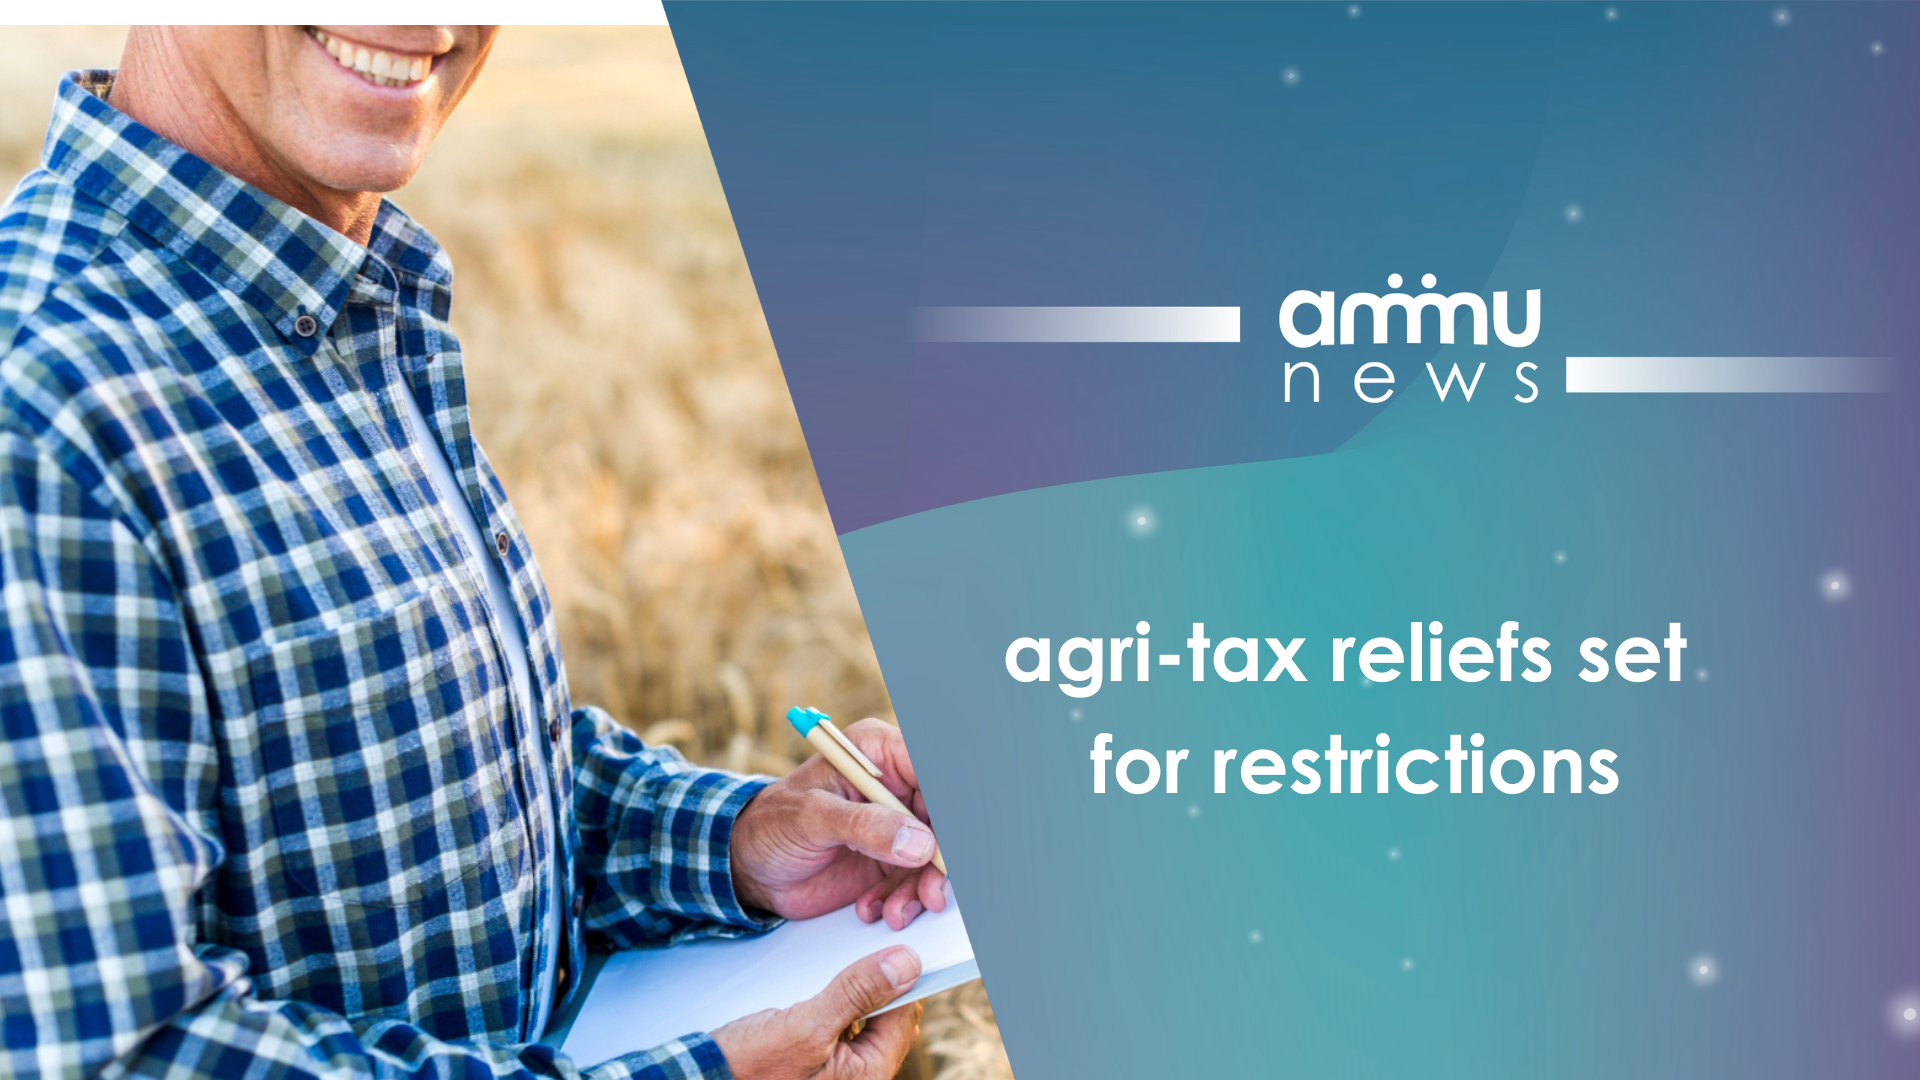 Agri-tax reliefs set for restrictions